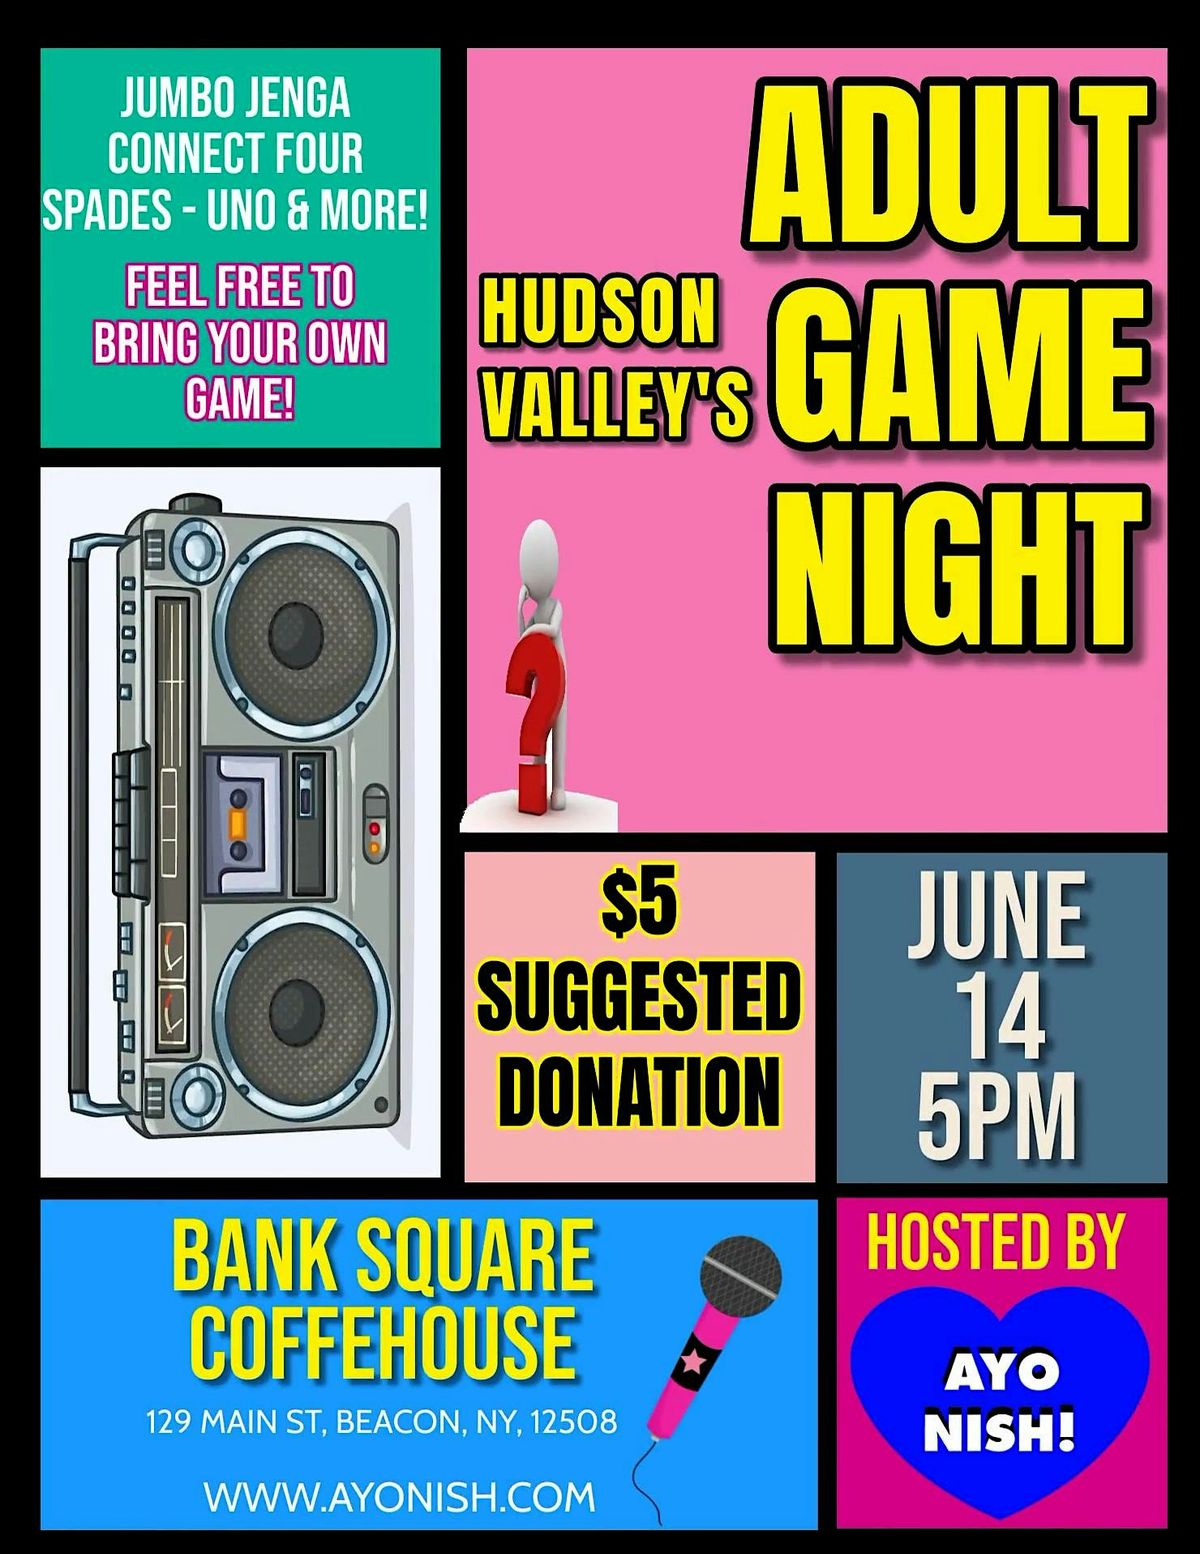 Hudson Valley's Adult Game Night